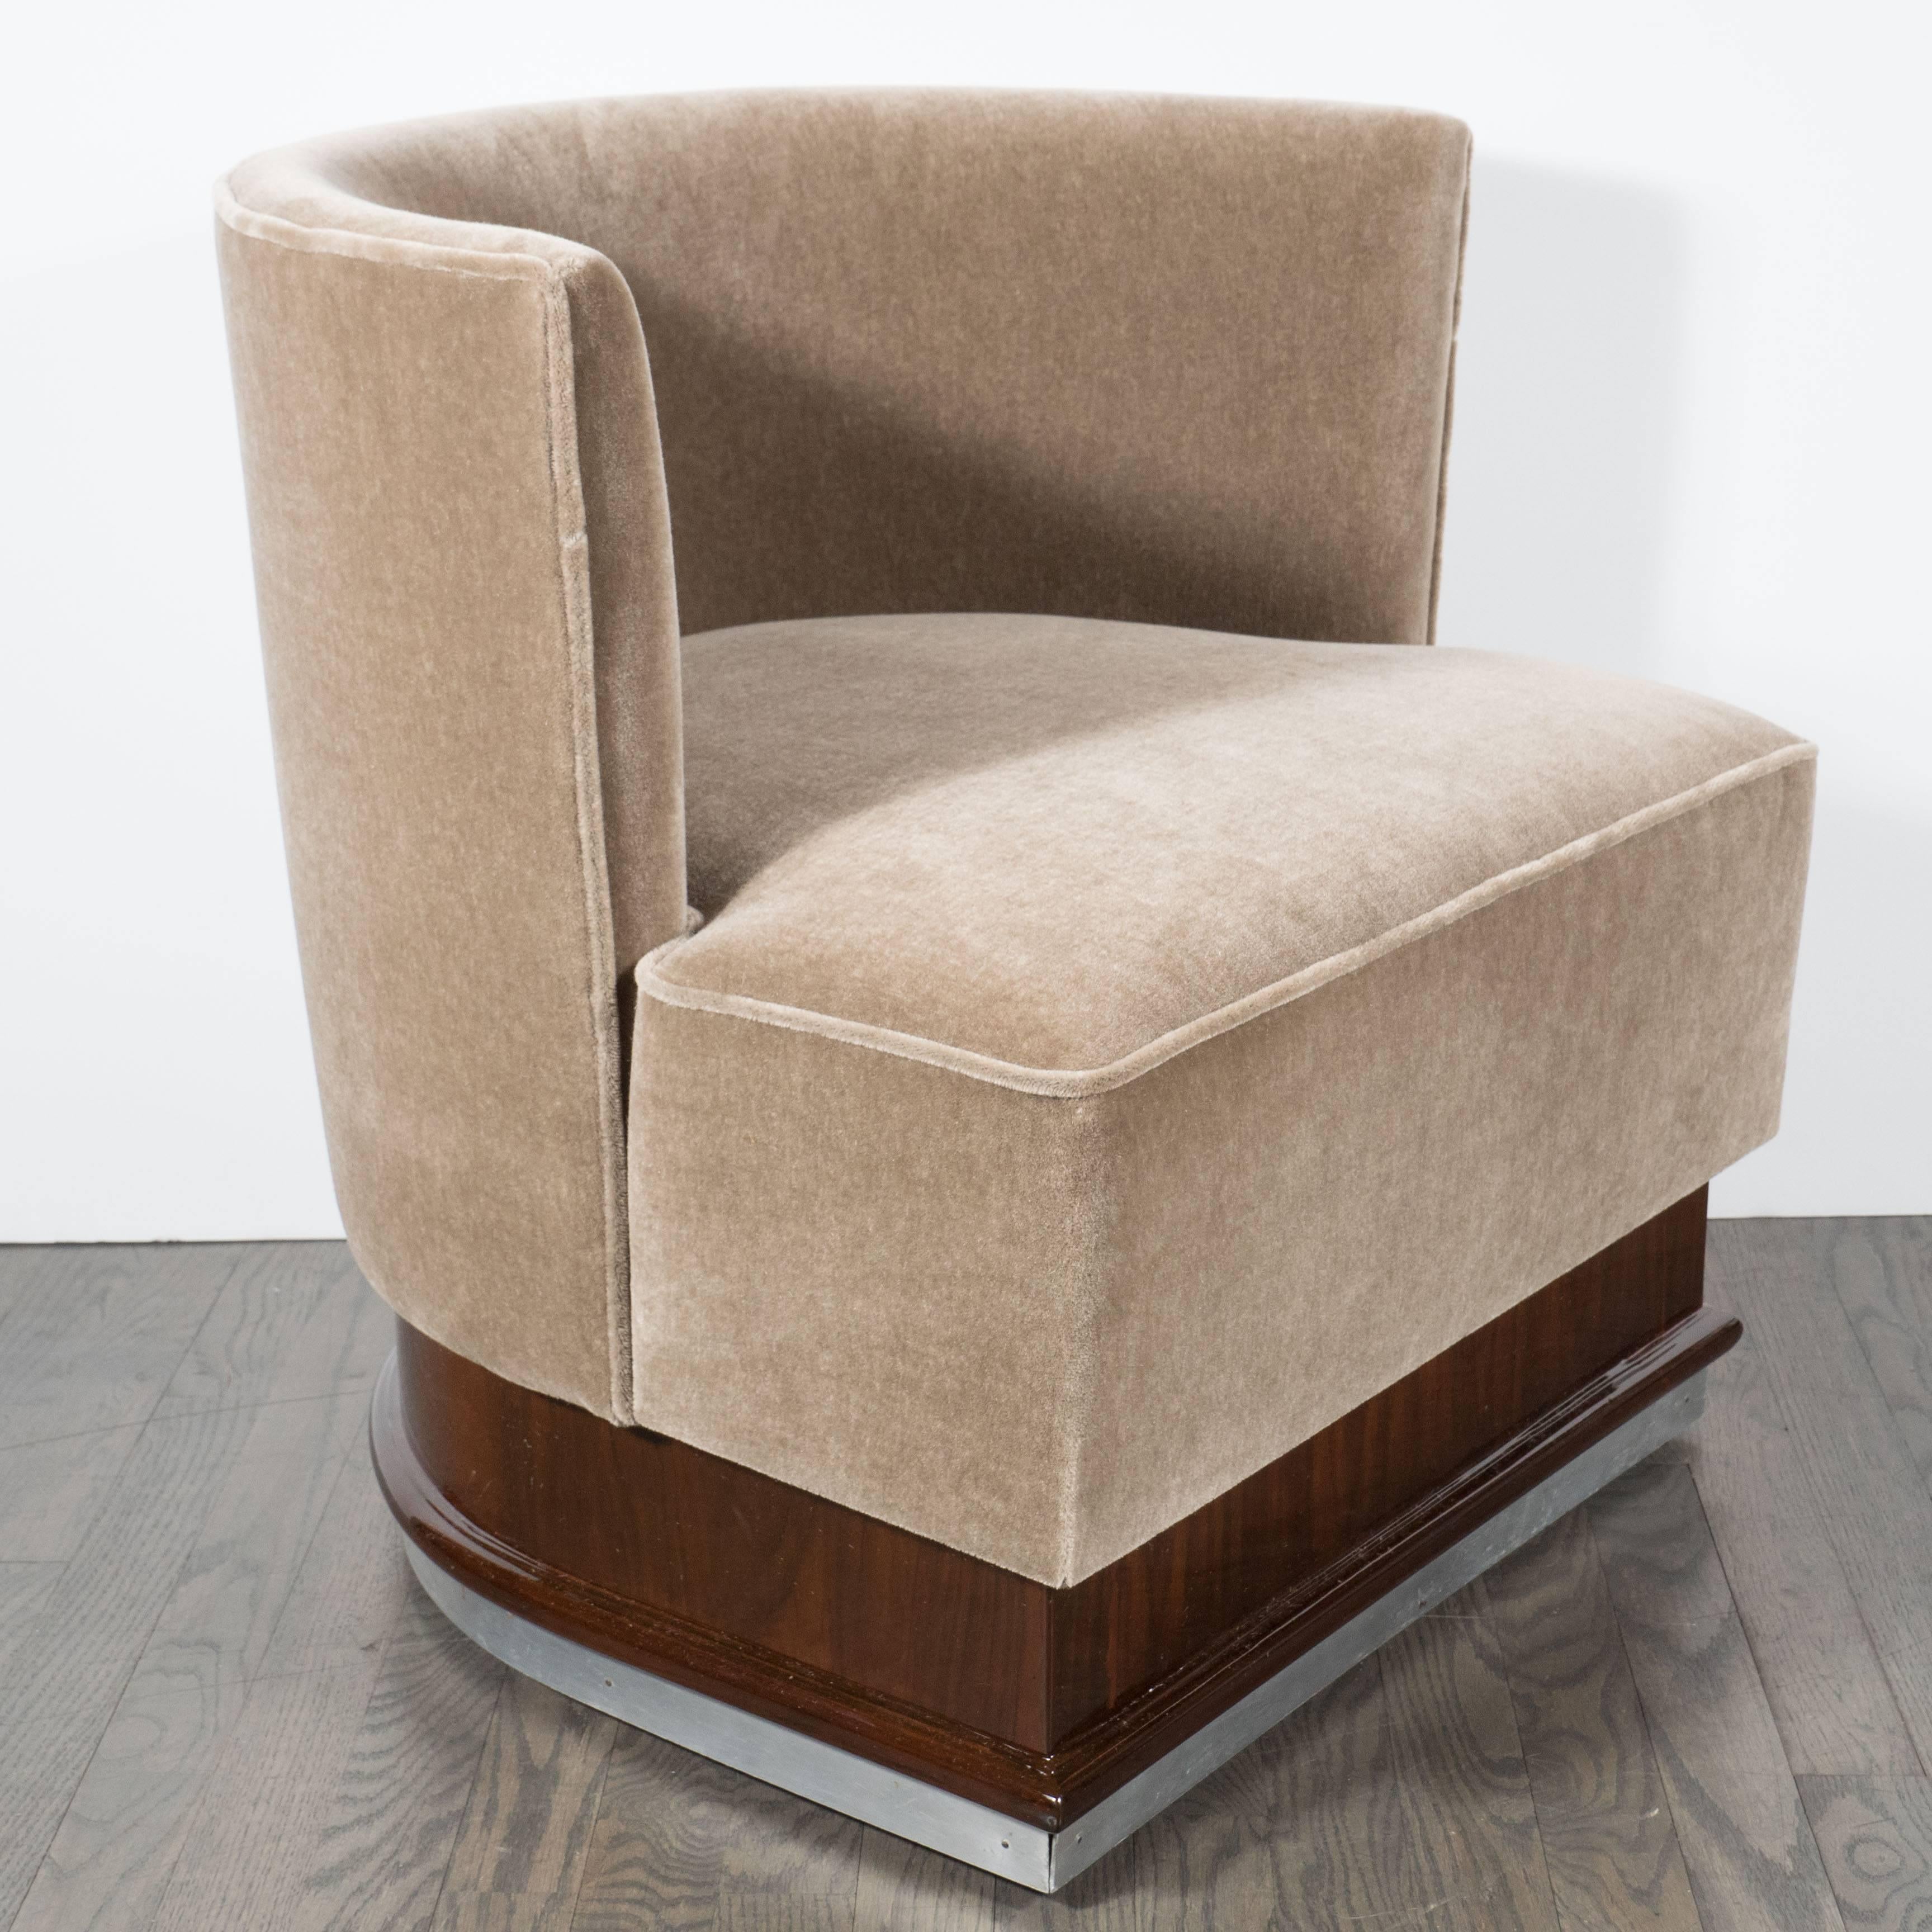 An Art Deco Machine Age curved-back chair and ottoman, attributed to the legendary Austrian-American Art Deco designer Paul Frankl. Frankl's sophisticated yet causal aesthetic attracted the Hollywood elite of the period, garnering clients that